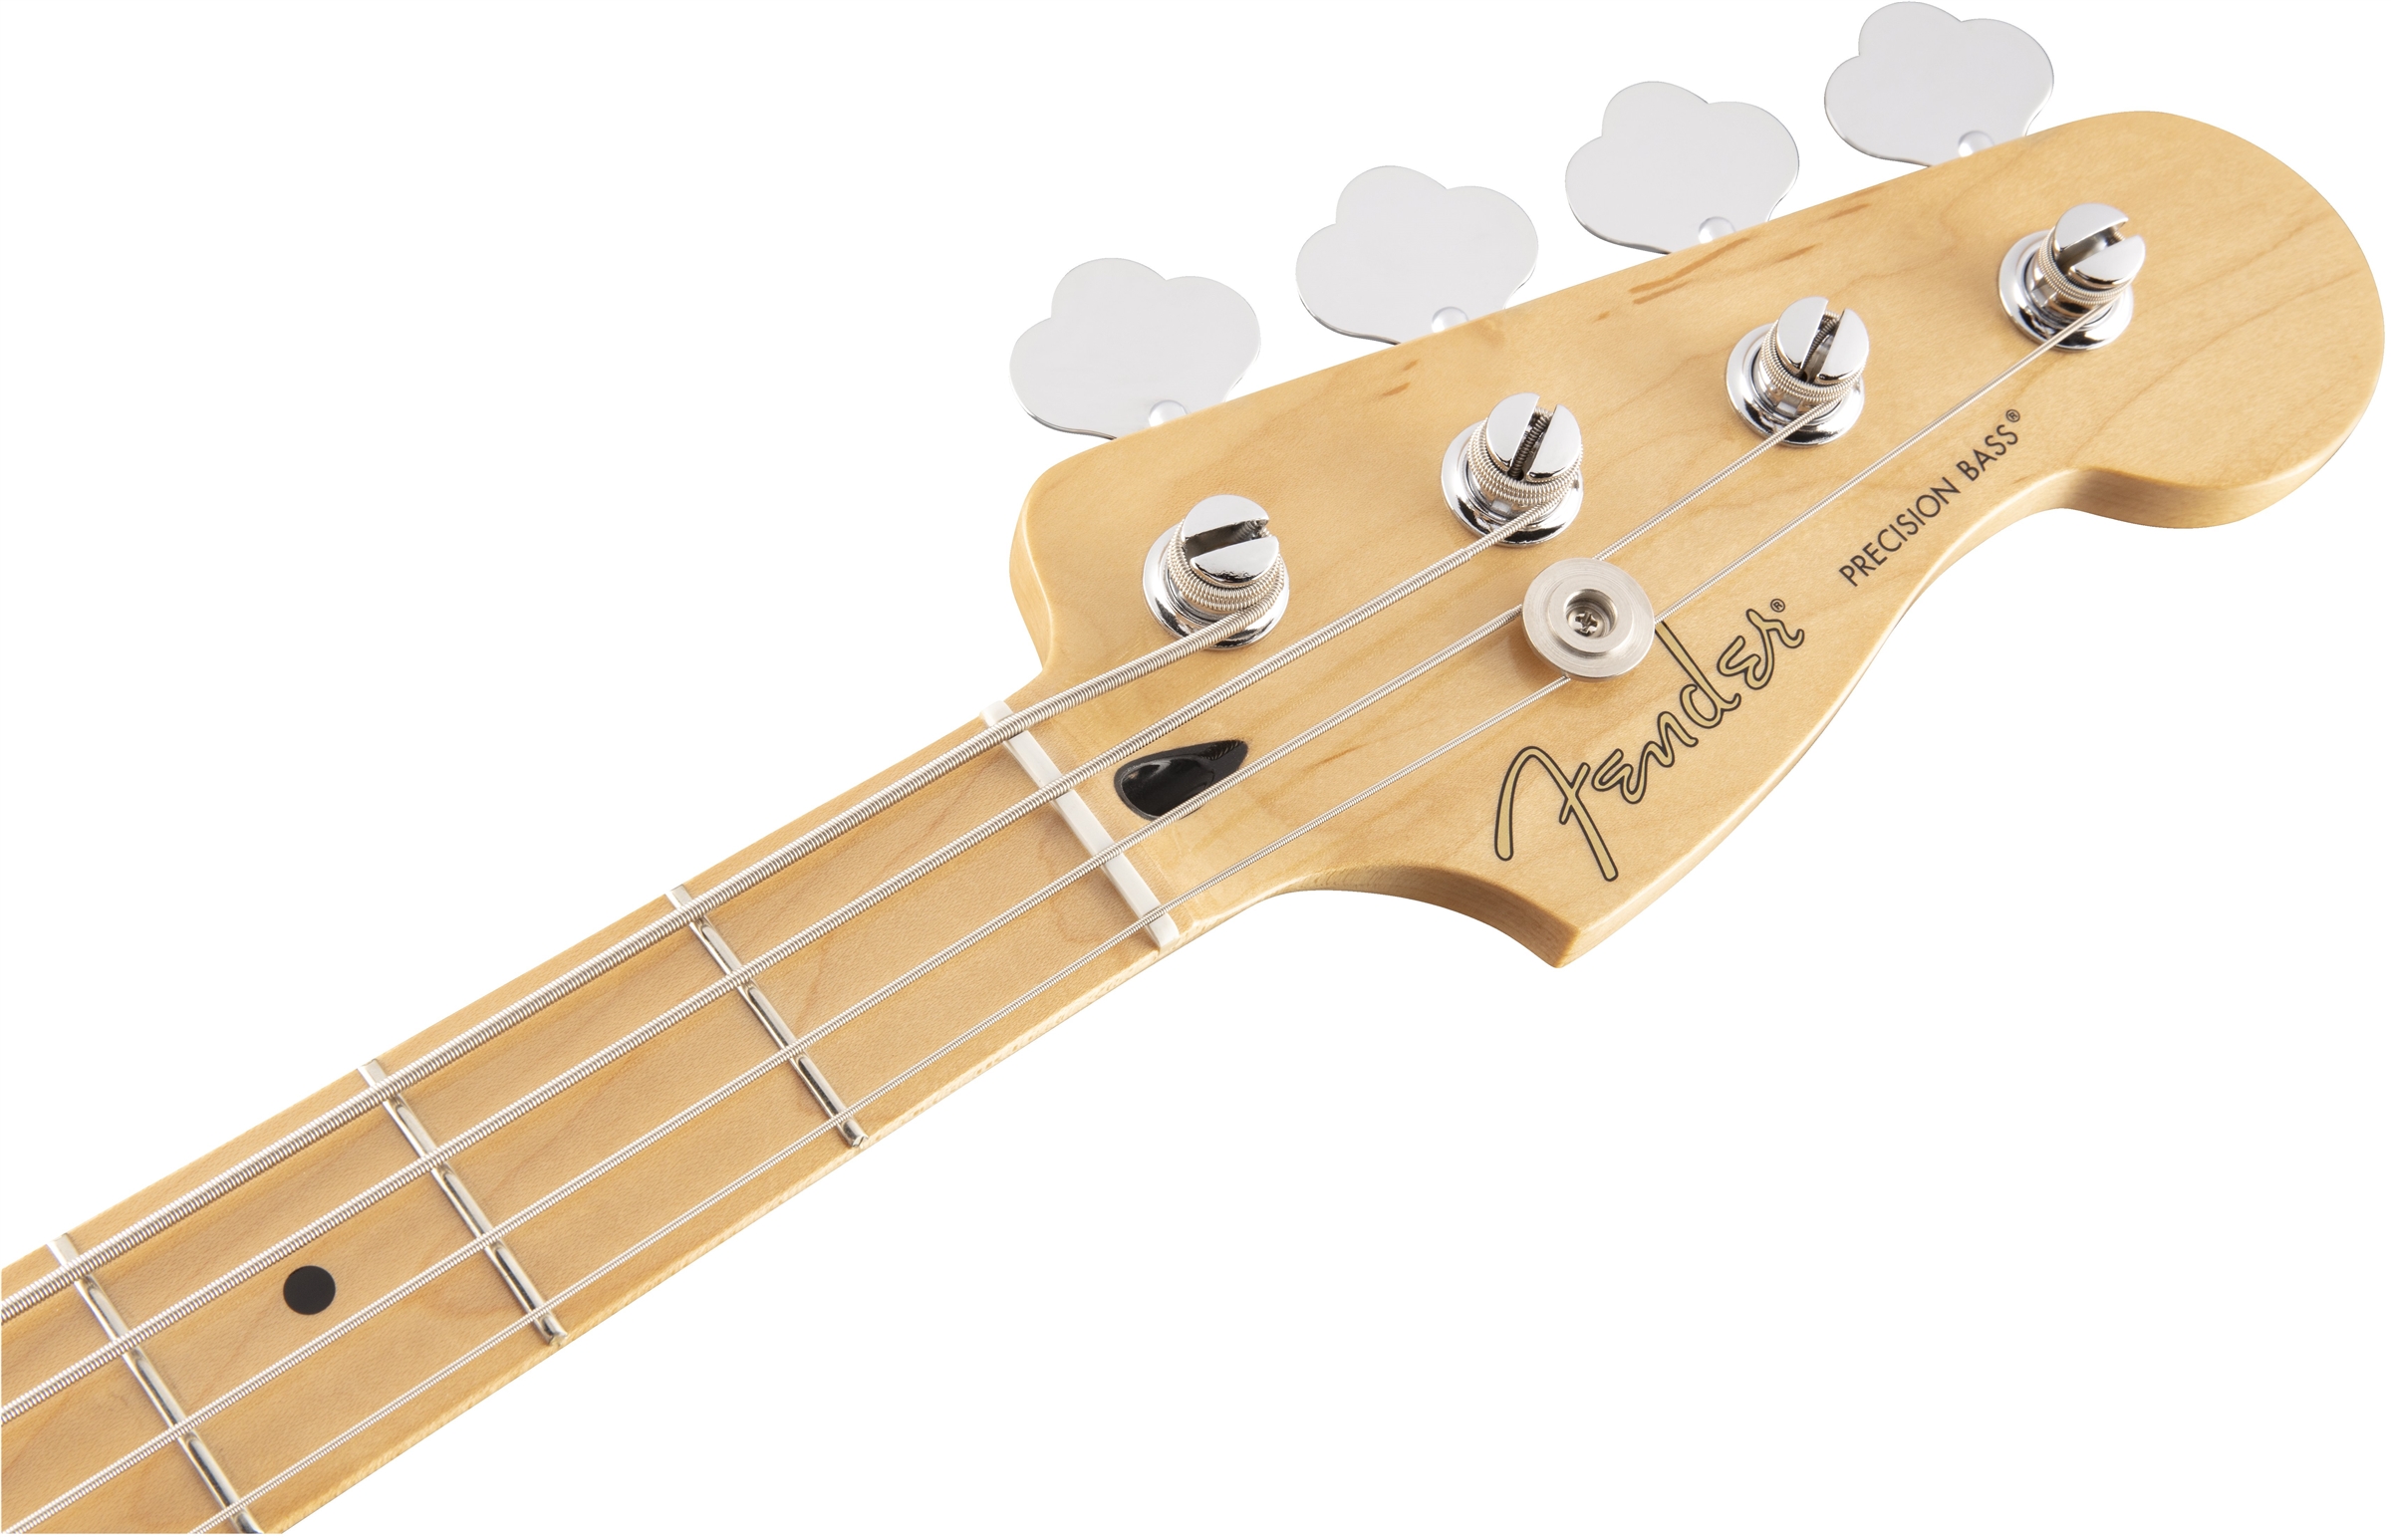 Fender Precision Bass Player Mex Mn - Polar White - Solid body electric bass - Variation 4